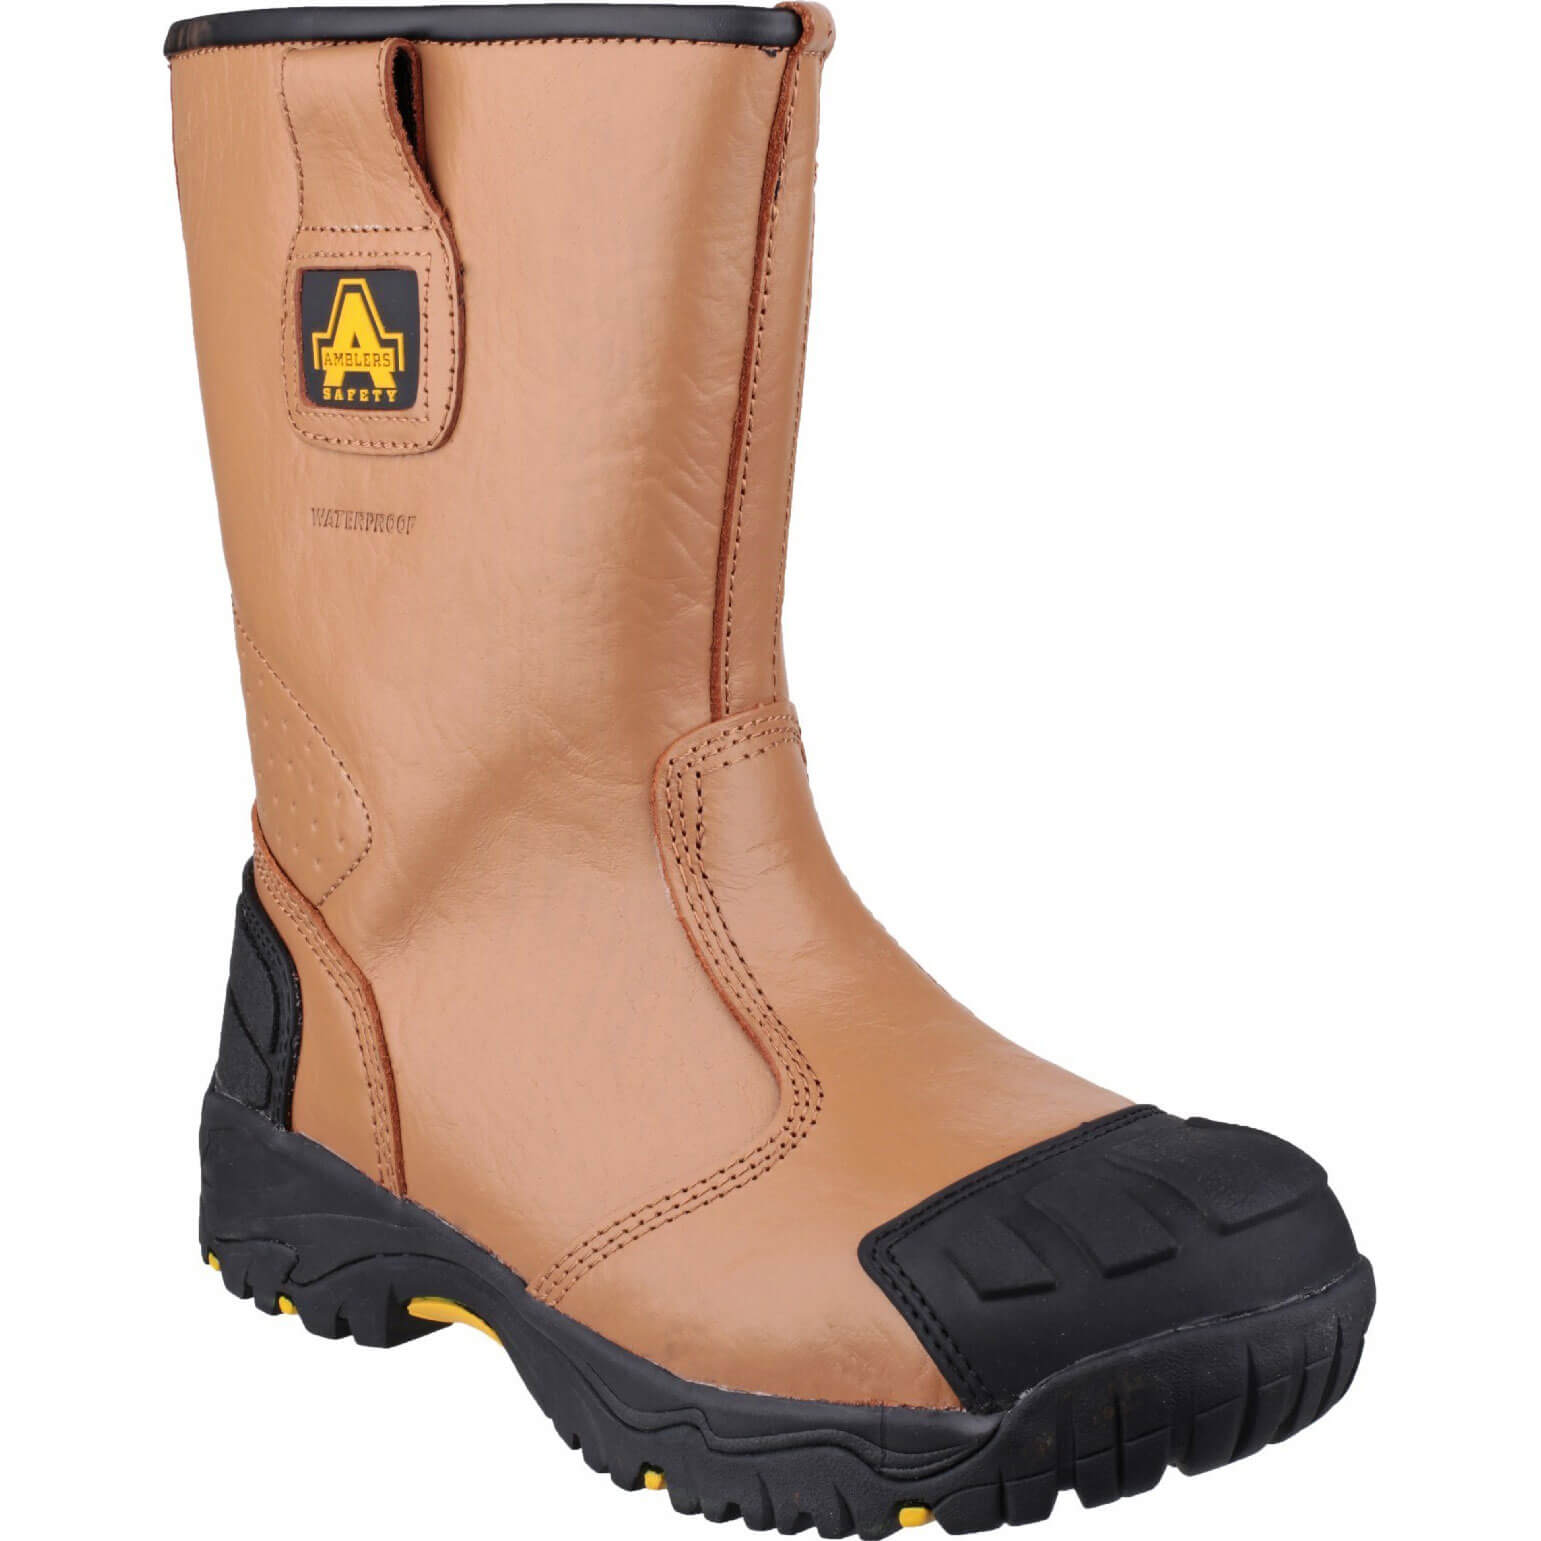 Photo of Amblers Mens Safety Fs143 Waterproof Safety Rigger Boots Tan Size 6